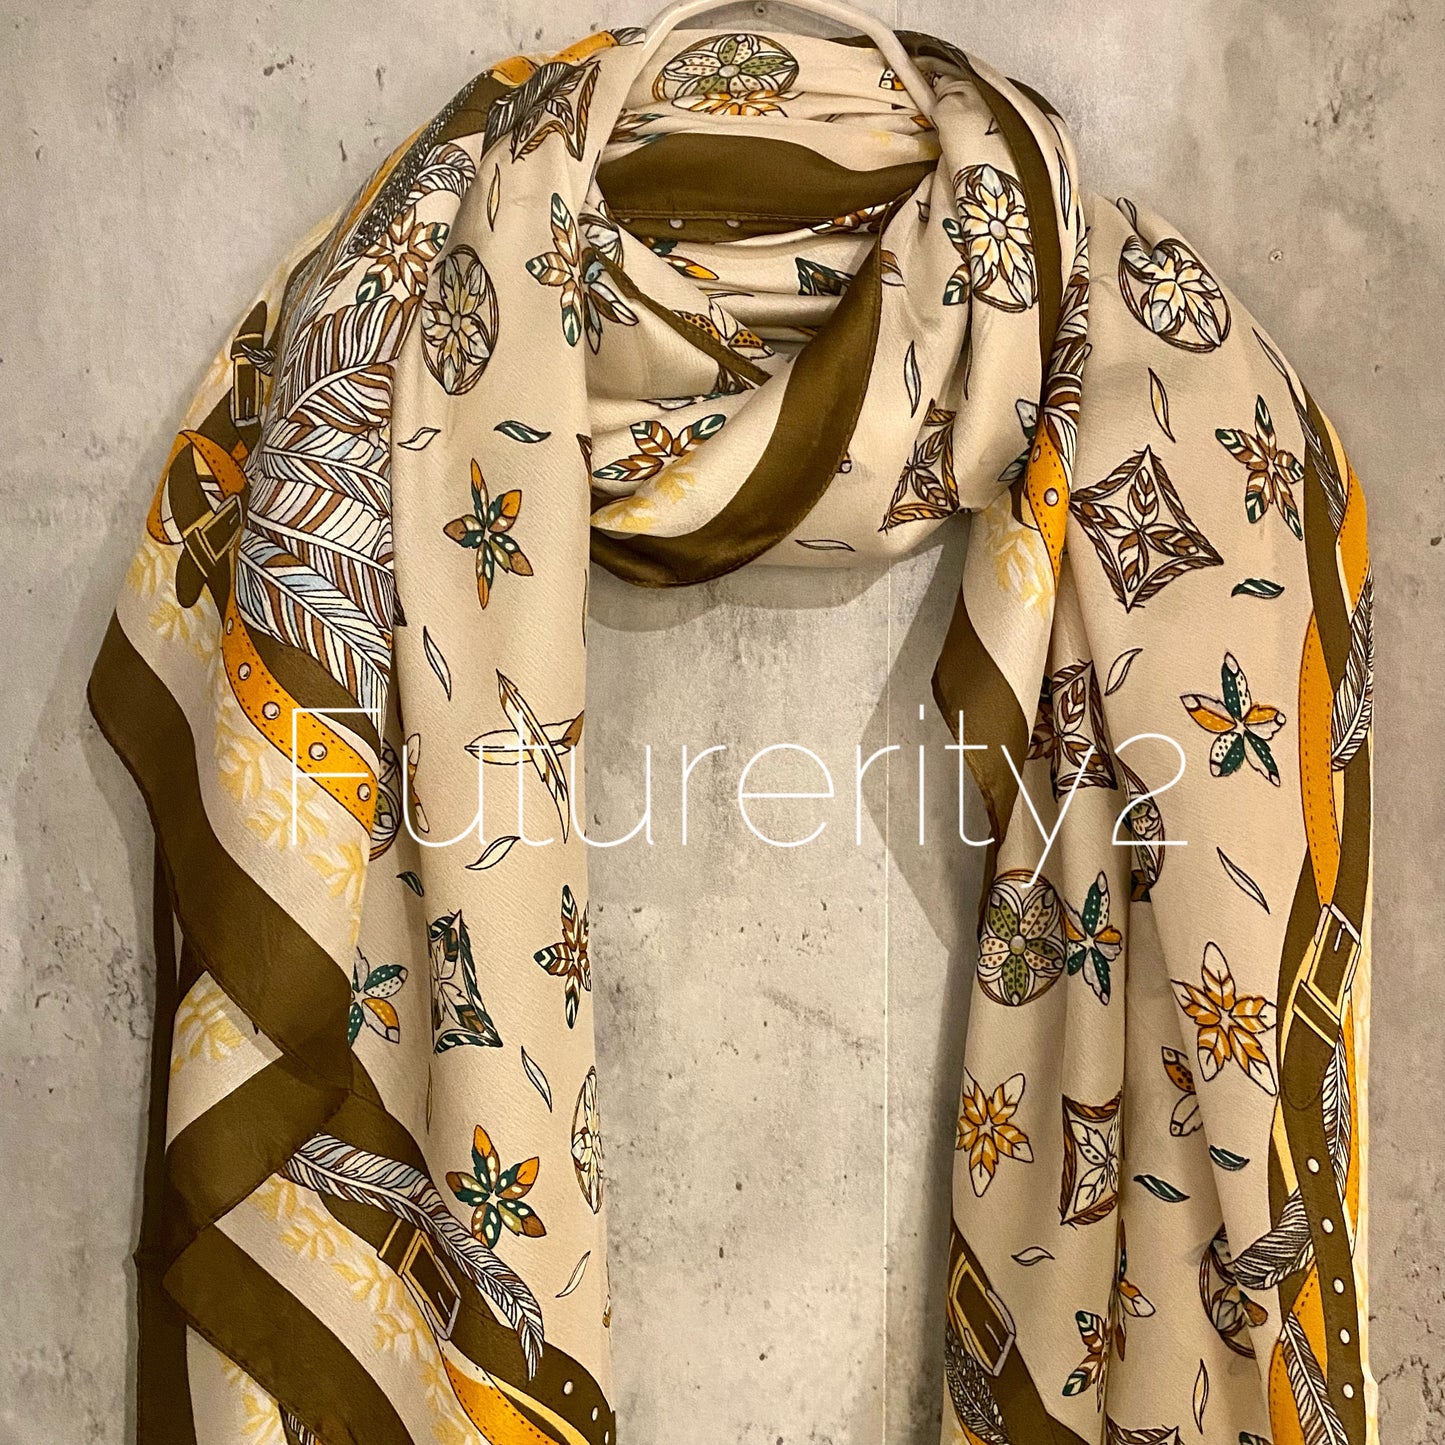 Small Florals And Feathers Pattern With Brown Trim Beige Silk Scarf/Spring Summer Scarf/Gifts For Mom/Gifts For Her Birthday Christmas/UK